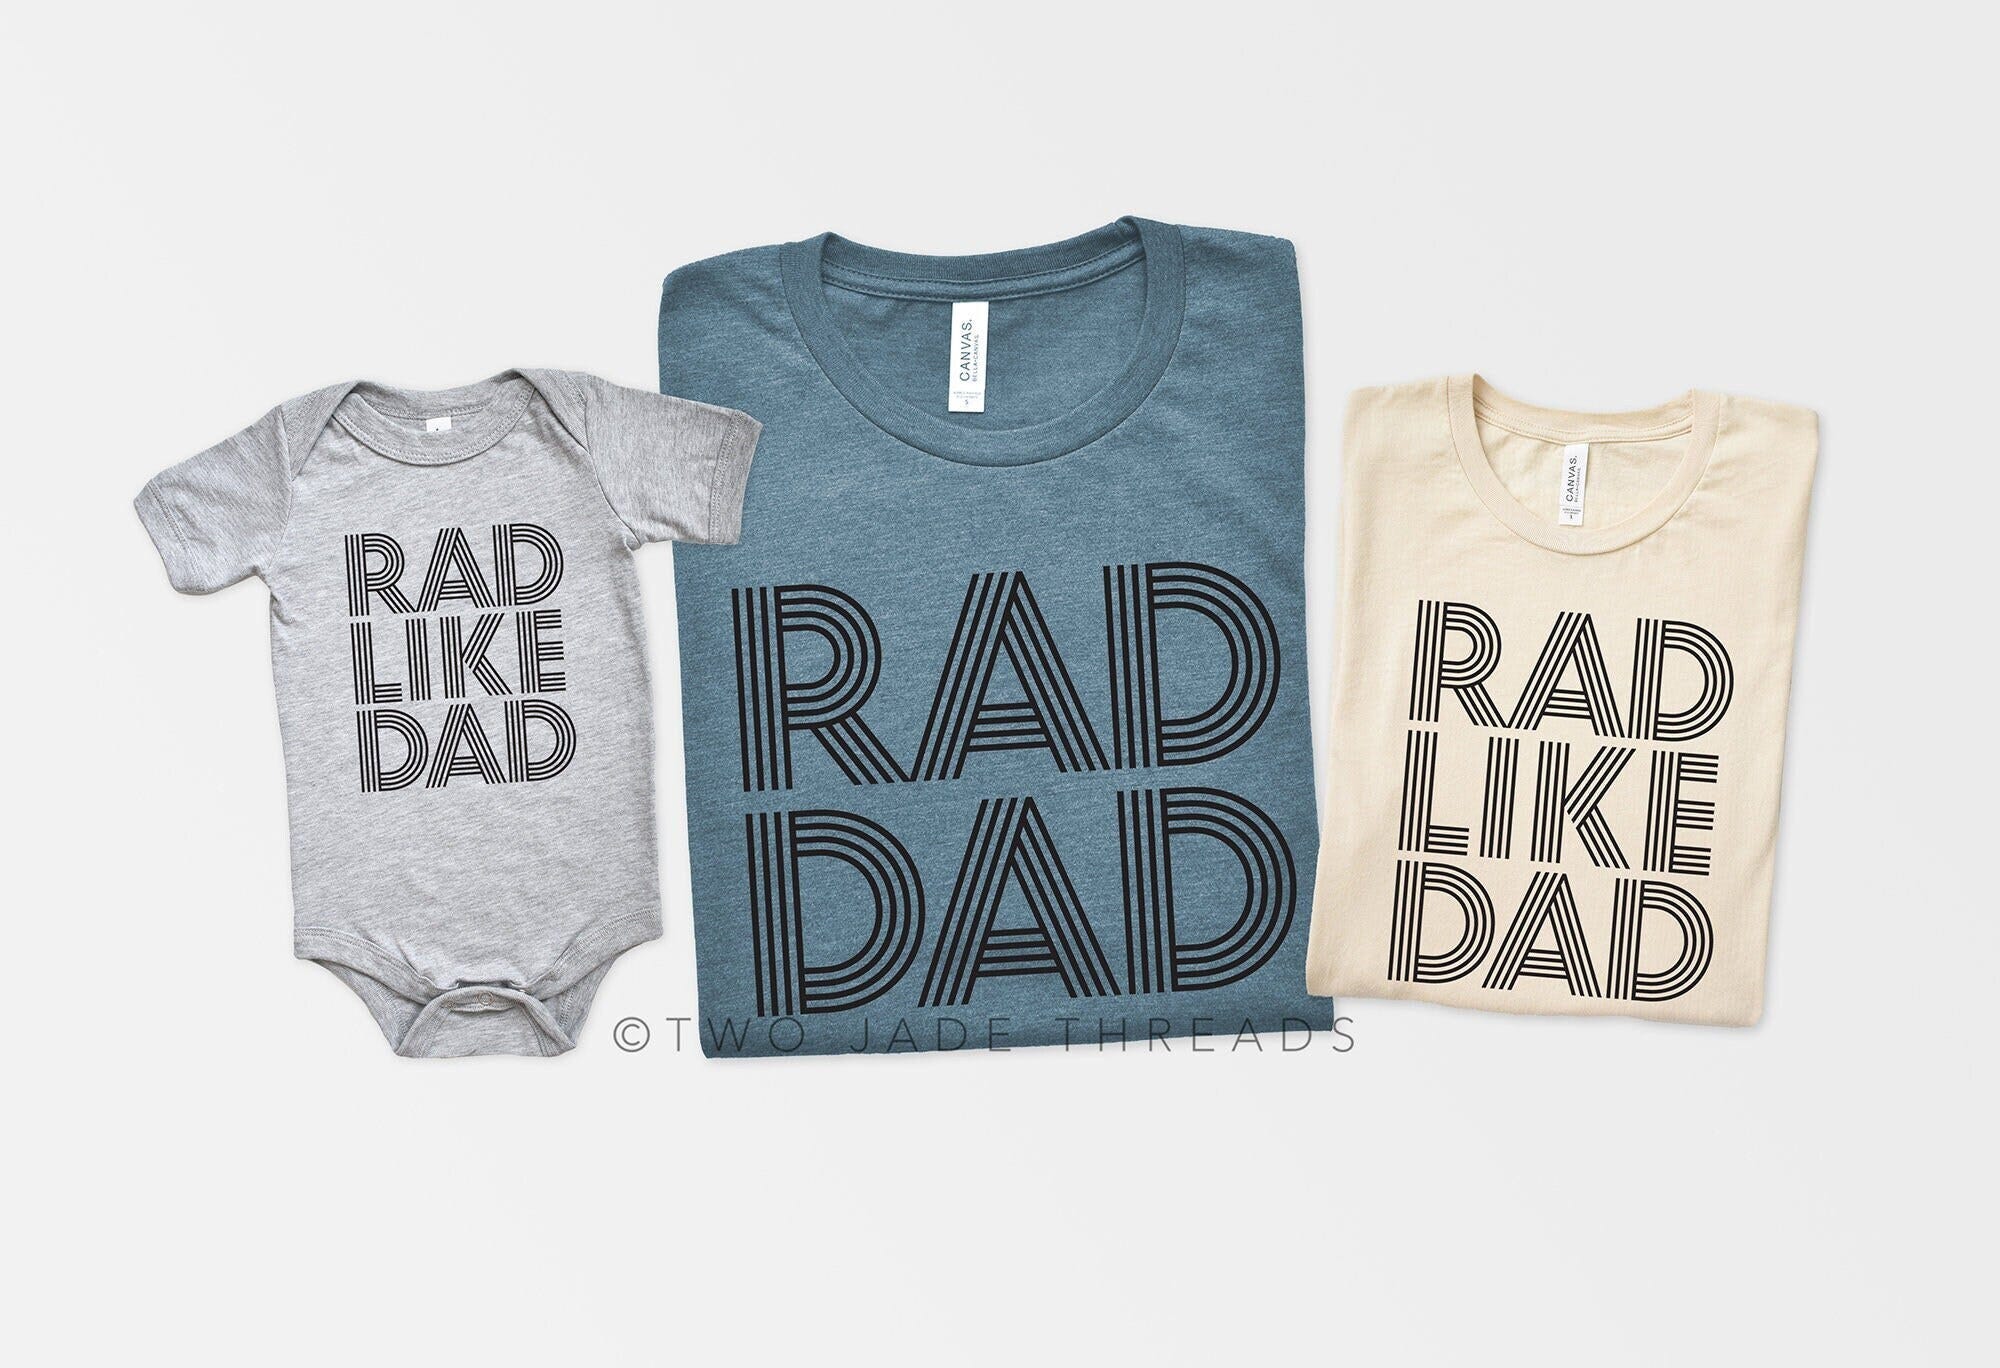 Dad and Son Matching Shirts, Rad Dad Shirt, Rad Like Dad Shirt, Daddy and Me Matching Set, Fathers Day Gift for Dad and Baby Shirt Set